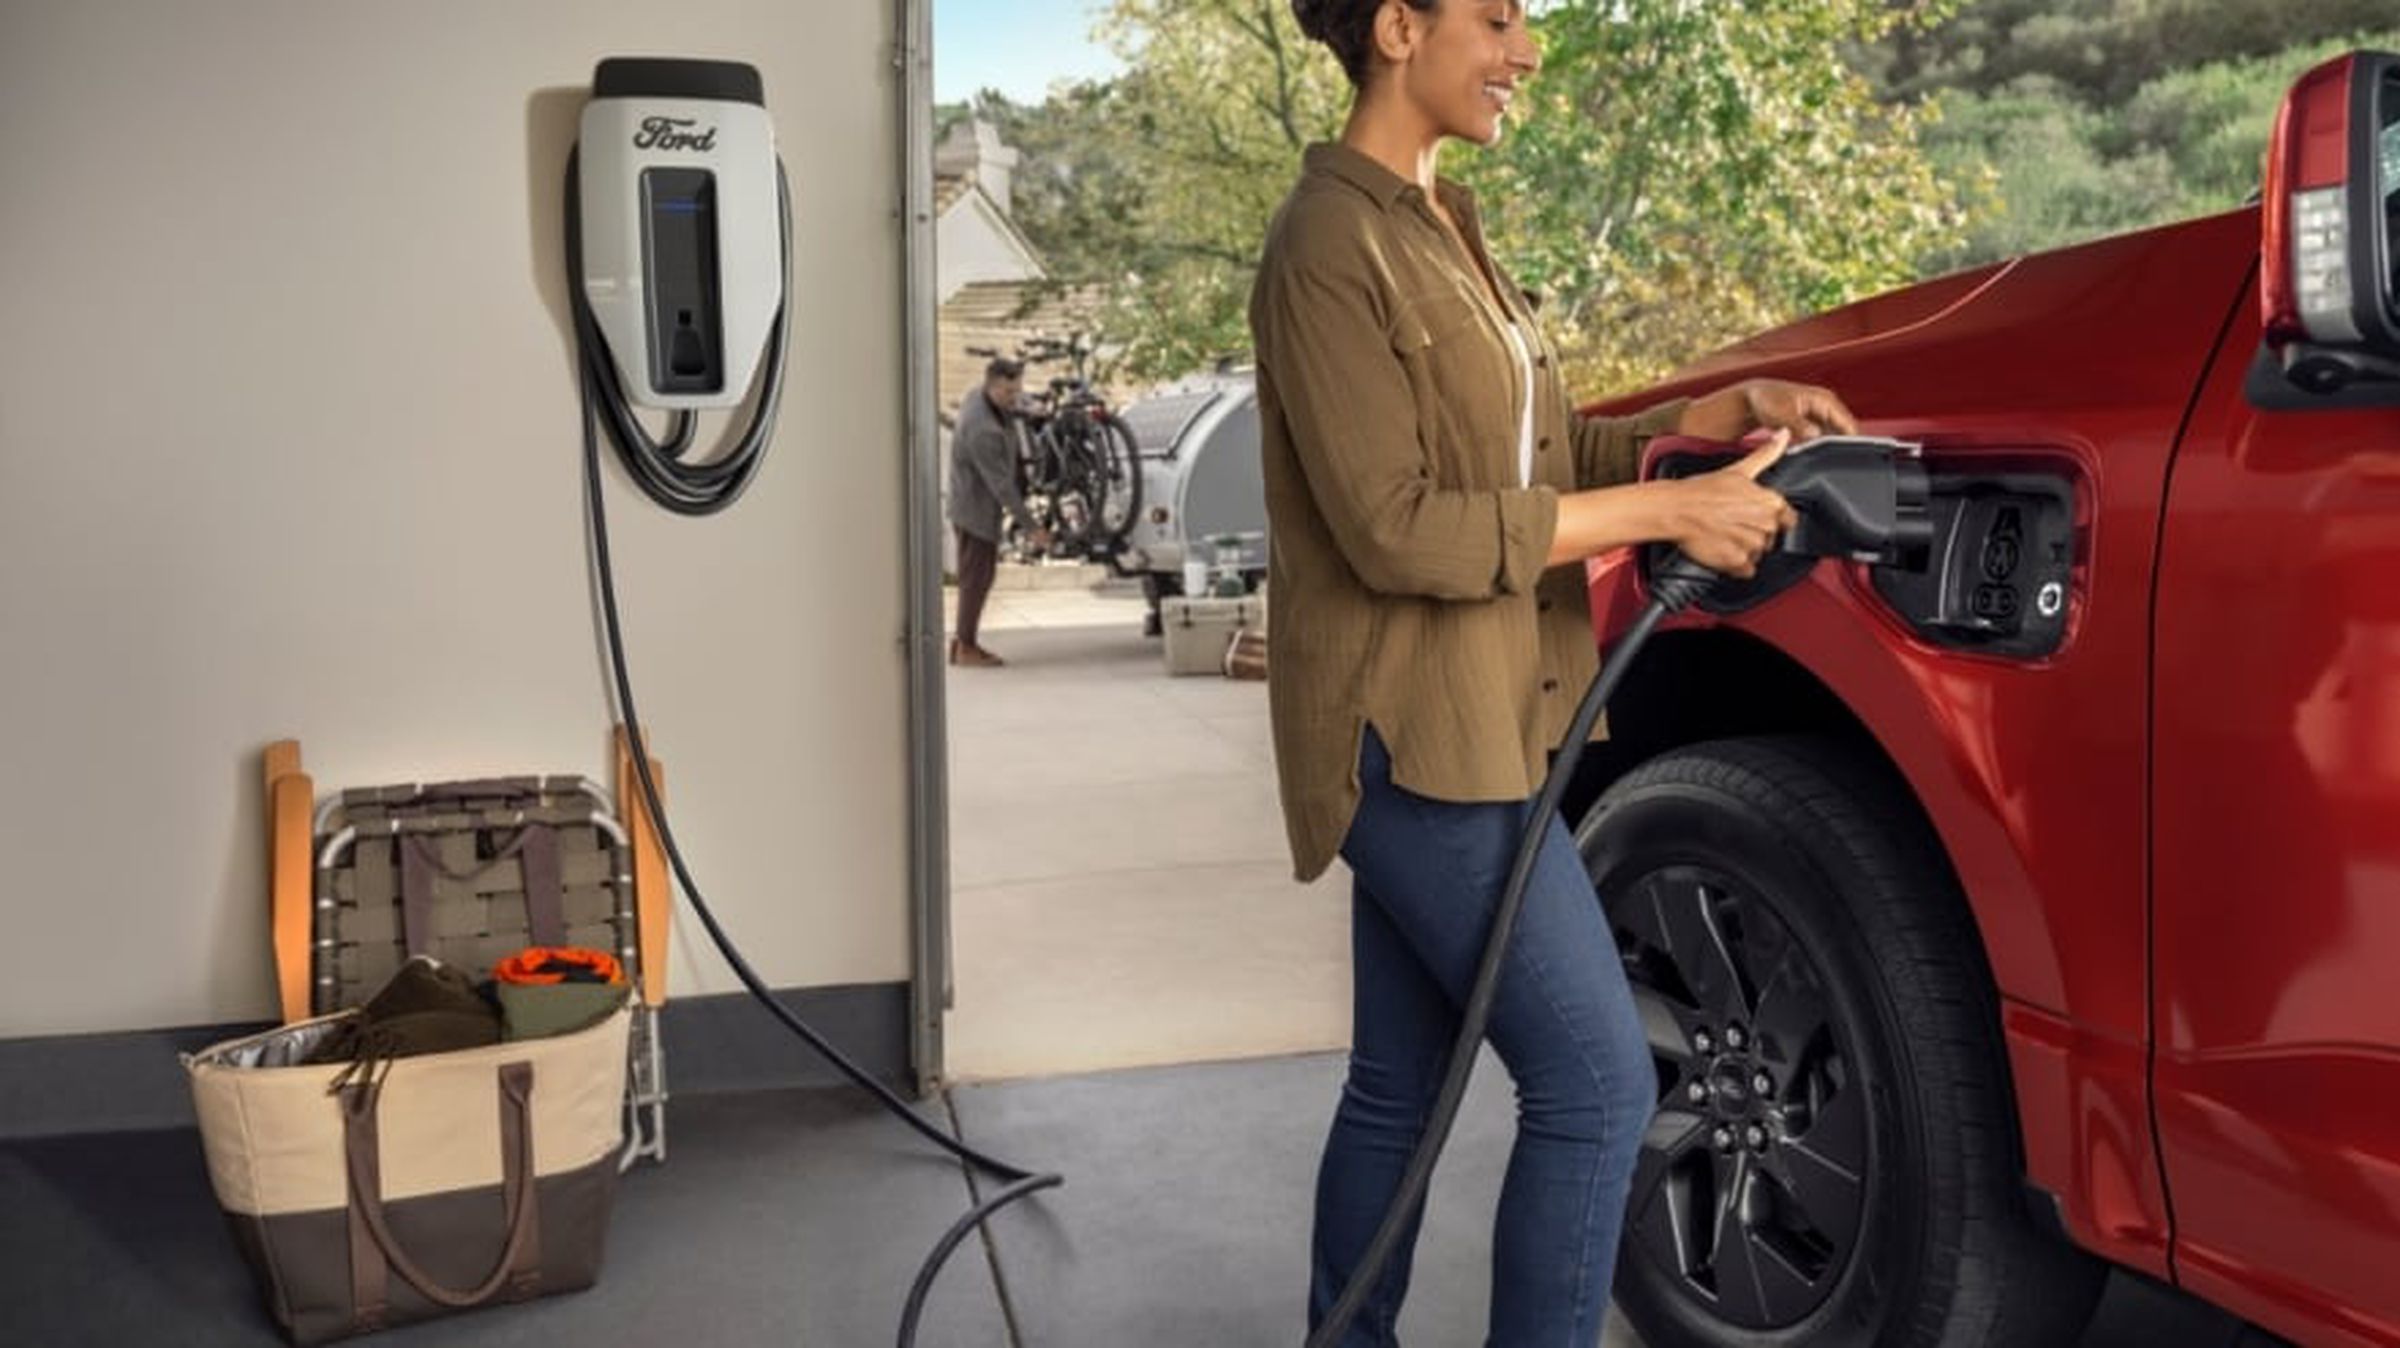 Bidirectional charging lets you power your home from your EV.